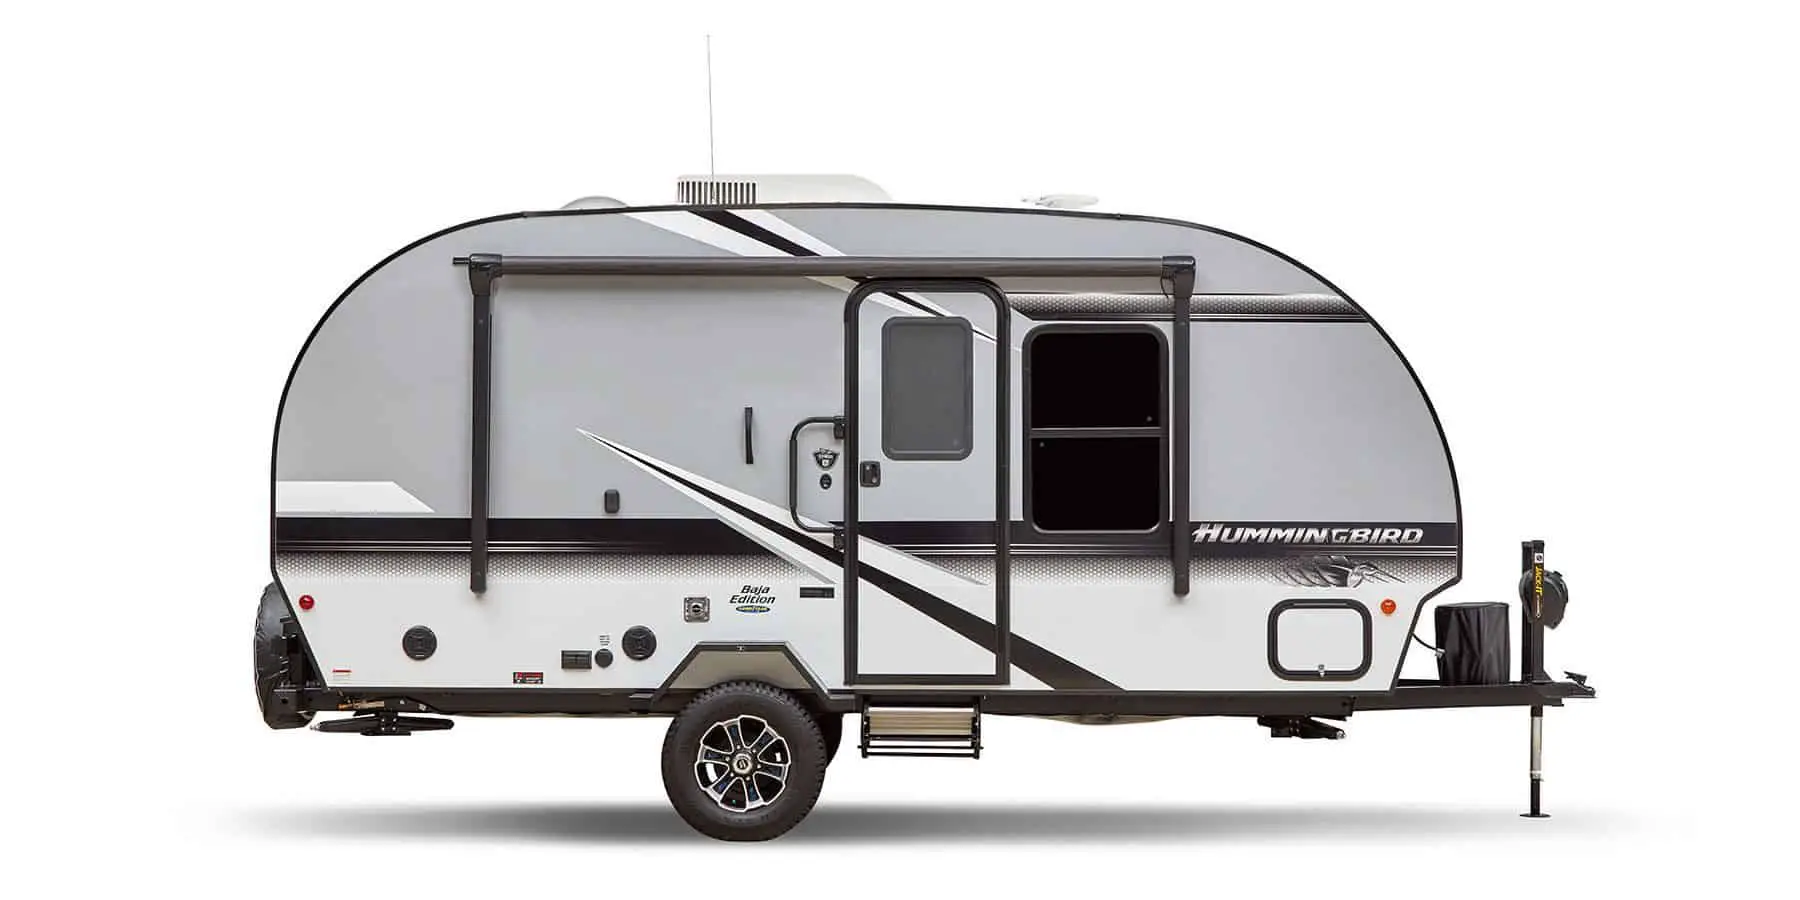 21 Great Travel Trailers Under 21 LBS GVWR   Team Camping